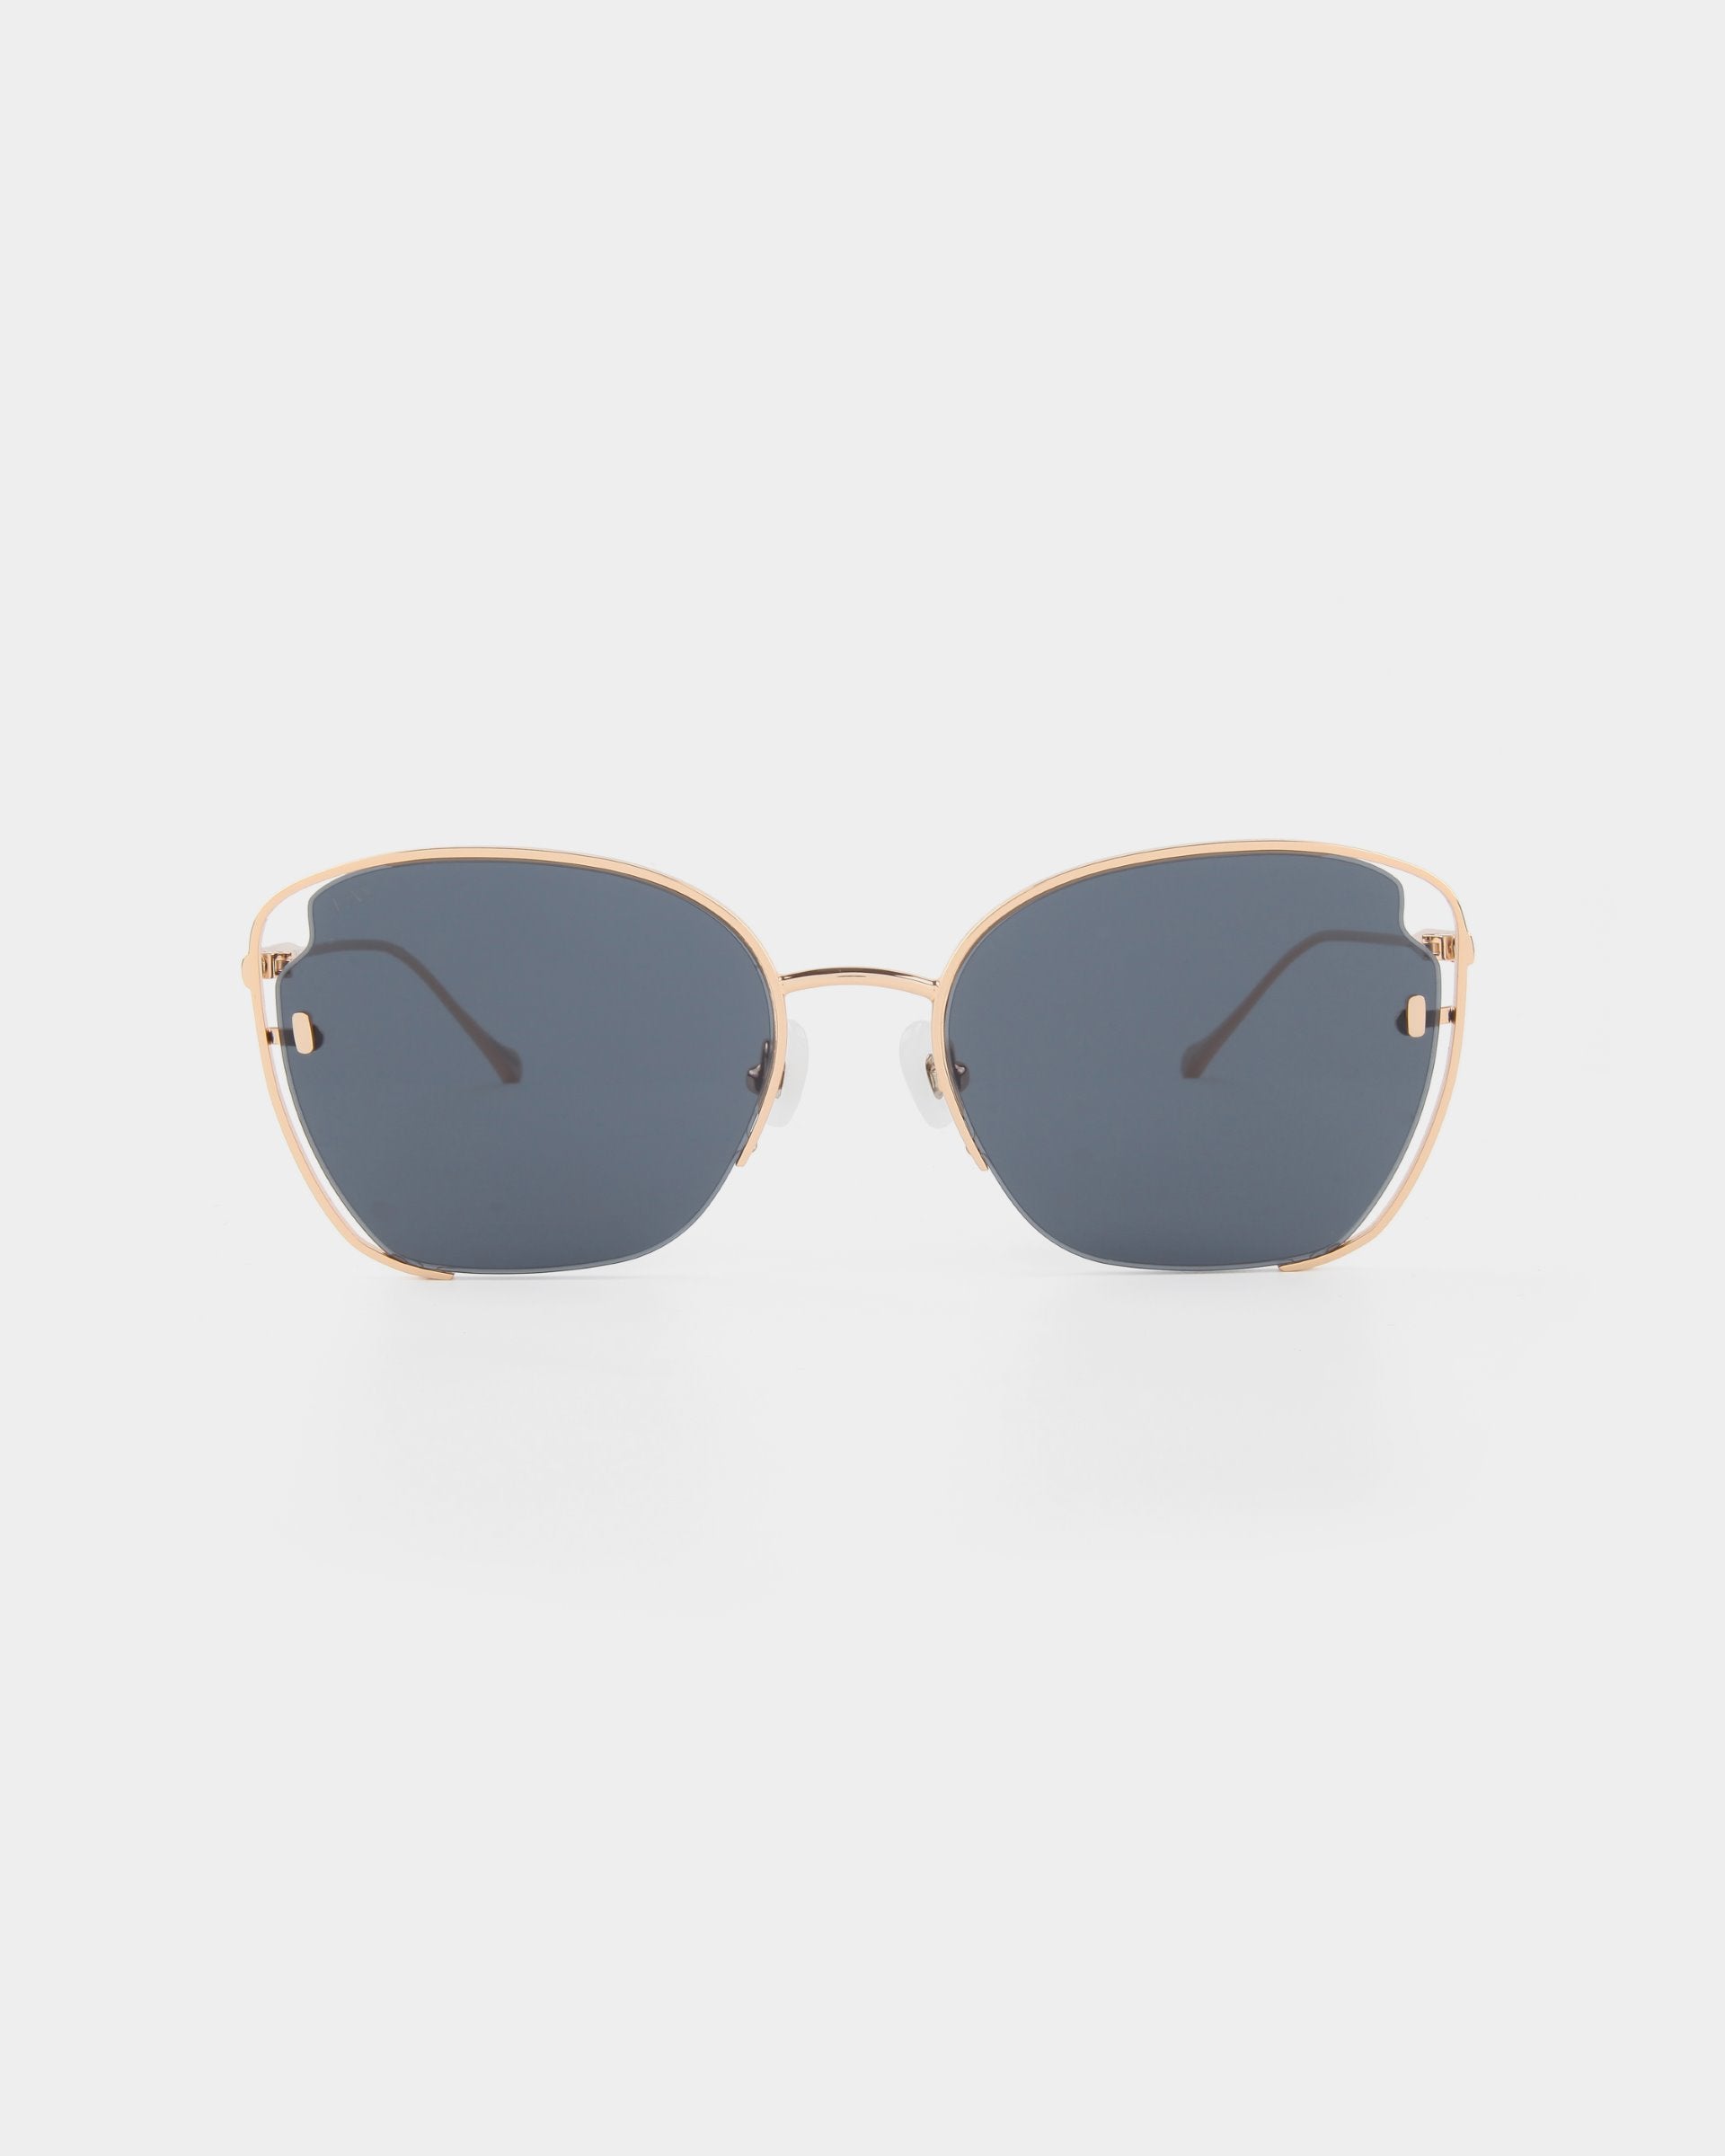 A pair of For Art's Sake® Eden sunglasses with 18-karat gold plated frames and dark blue-tinted, UVA & UVB-protected lenses viewed from the front against a white background. The frames have a slight curve at the top and thin temples with black tips.